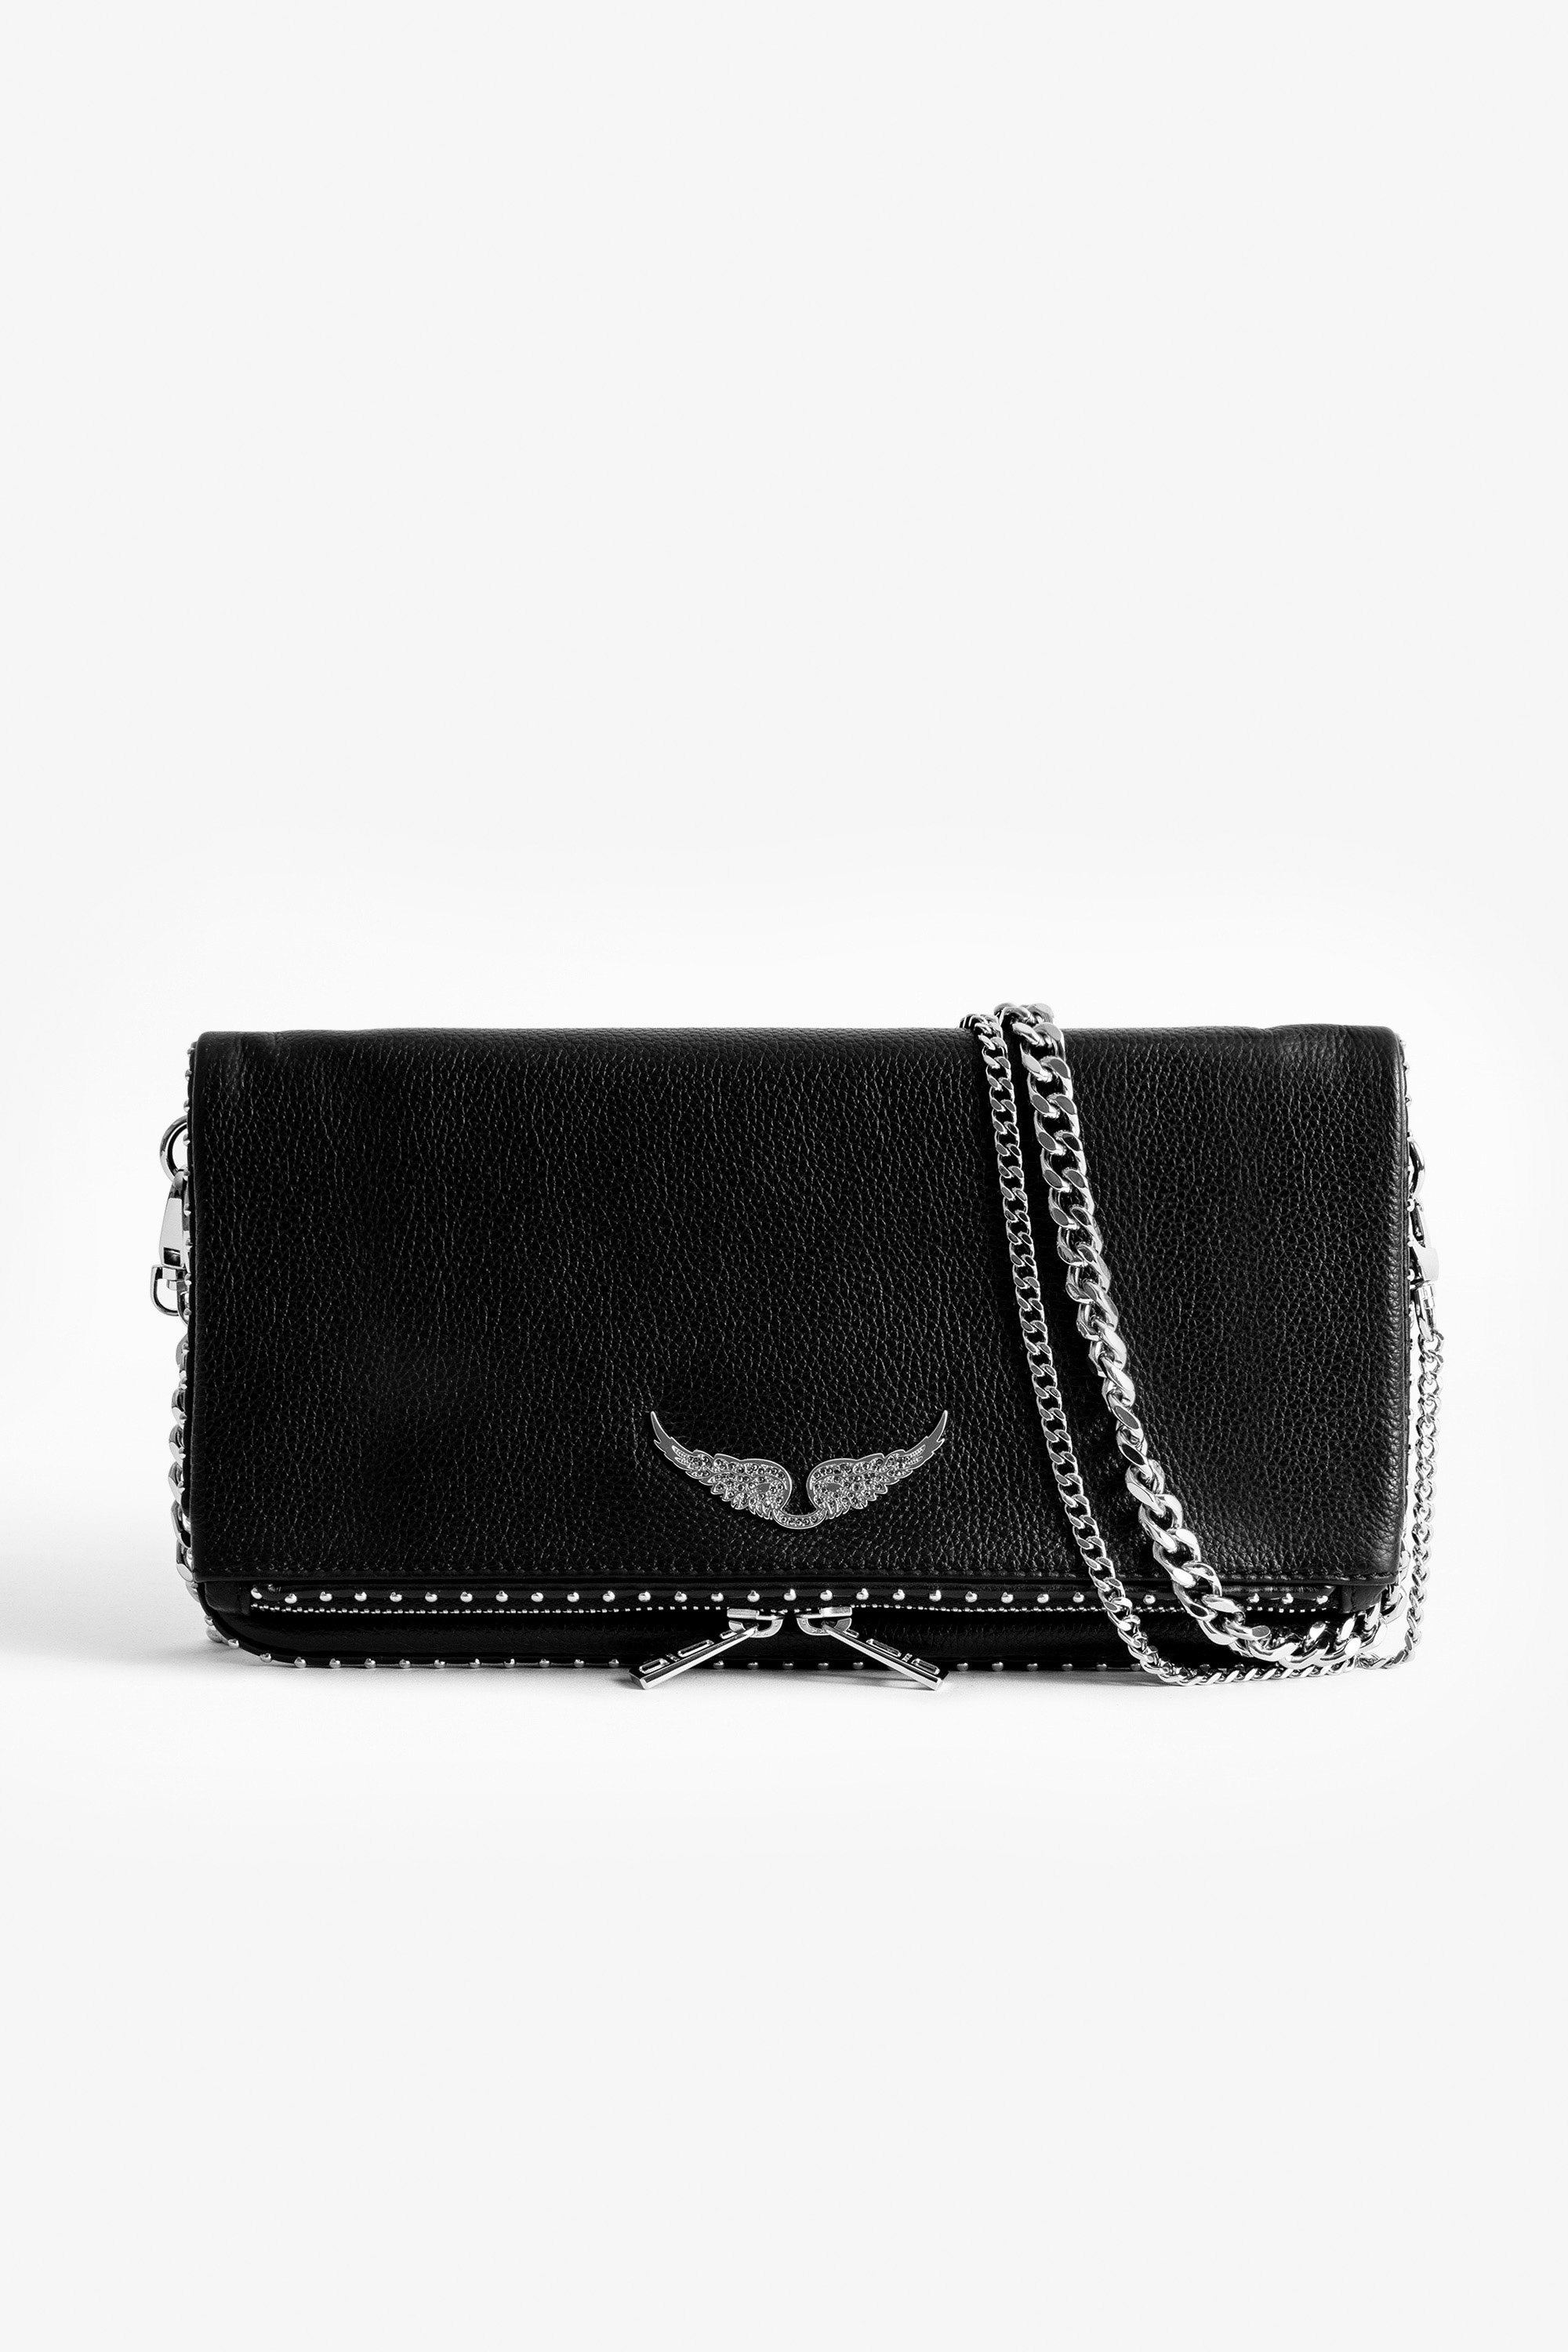 Rock Studs Clutch Women's black clutch in leather, embellished with studs.